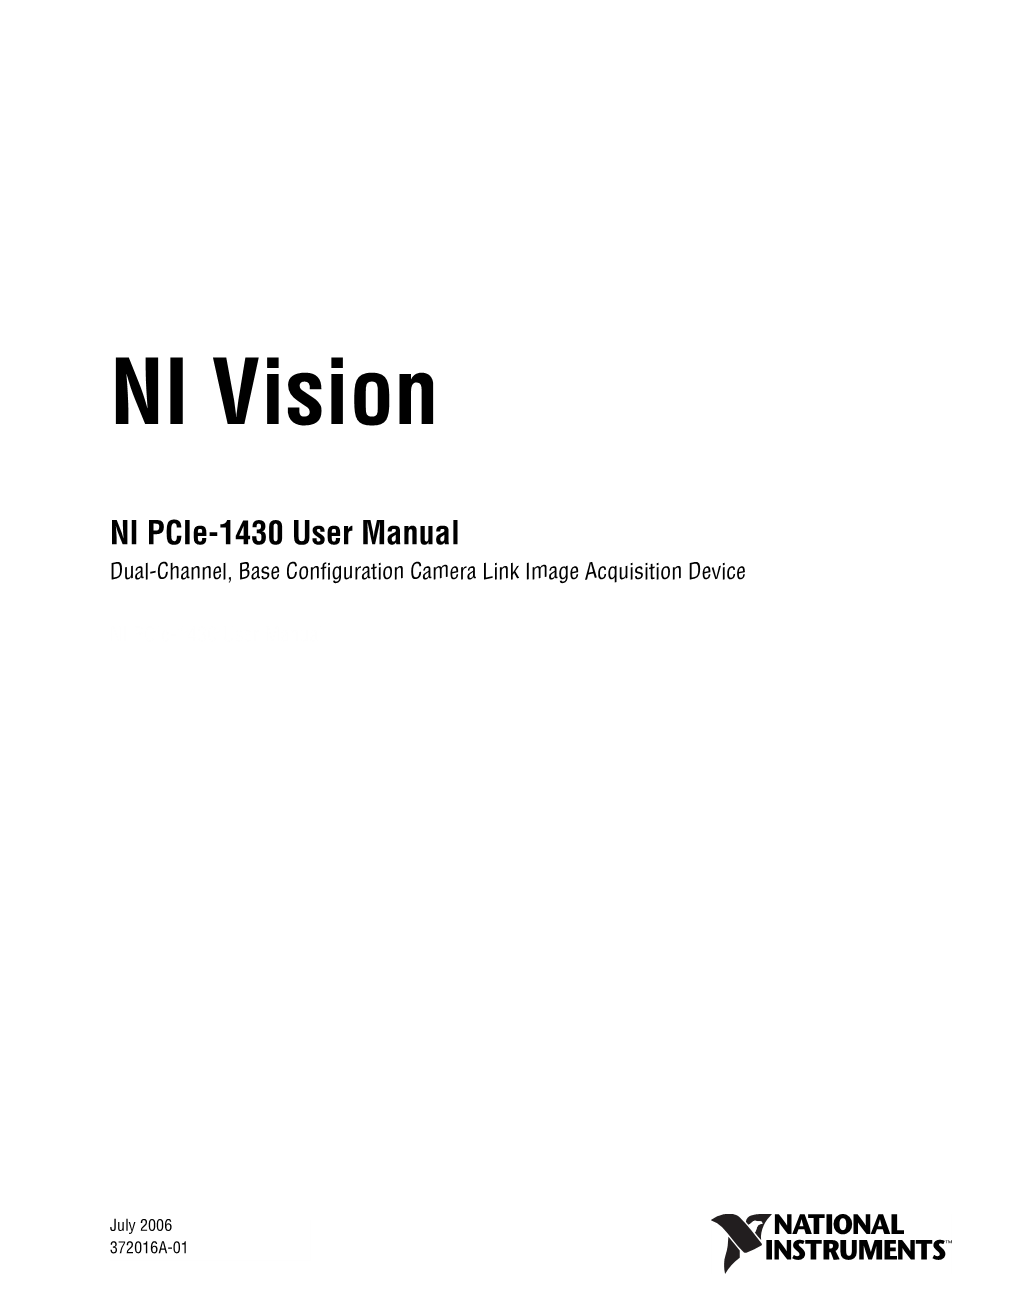 NI Pcie-1430 User Manual Dual-Channel, Base Configuration Camera Link Image Acquisition Device